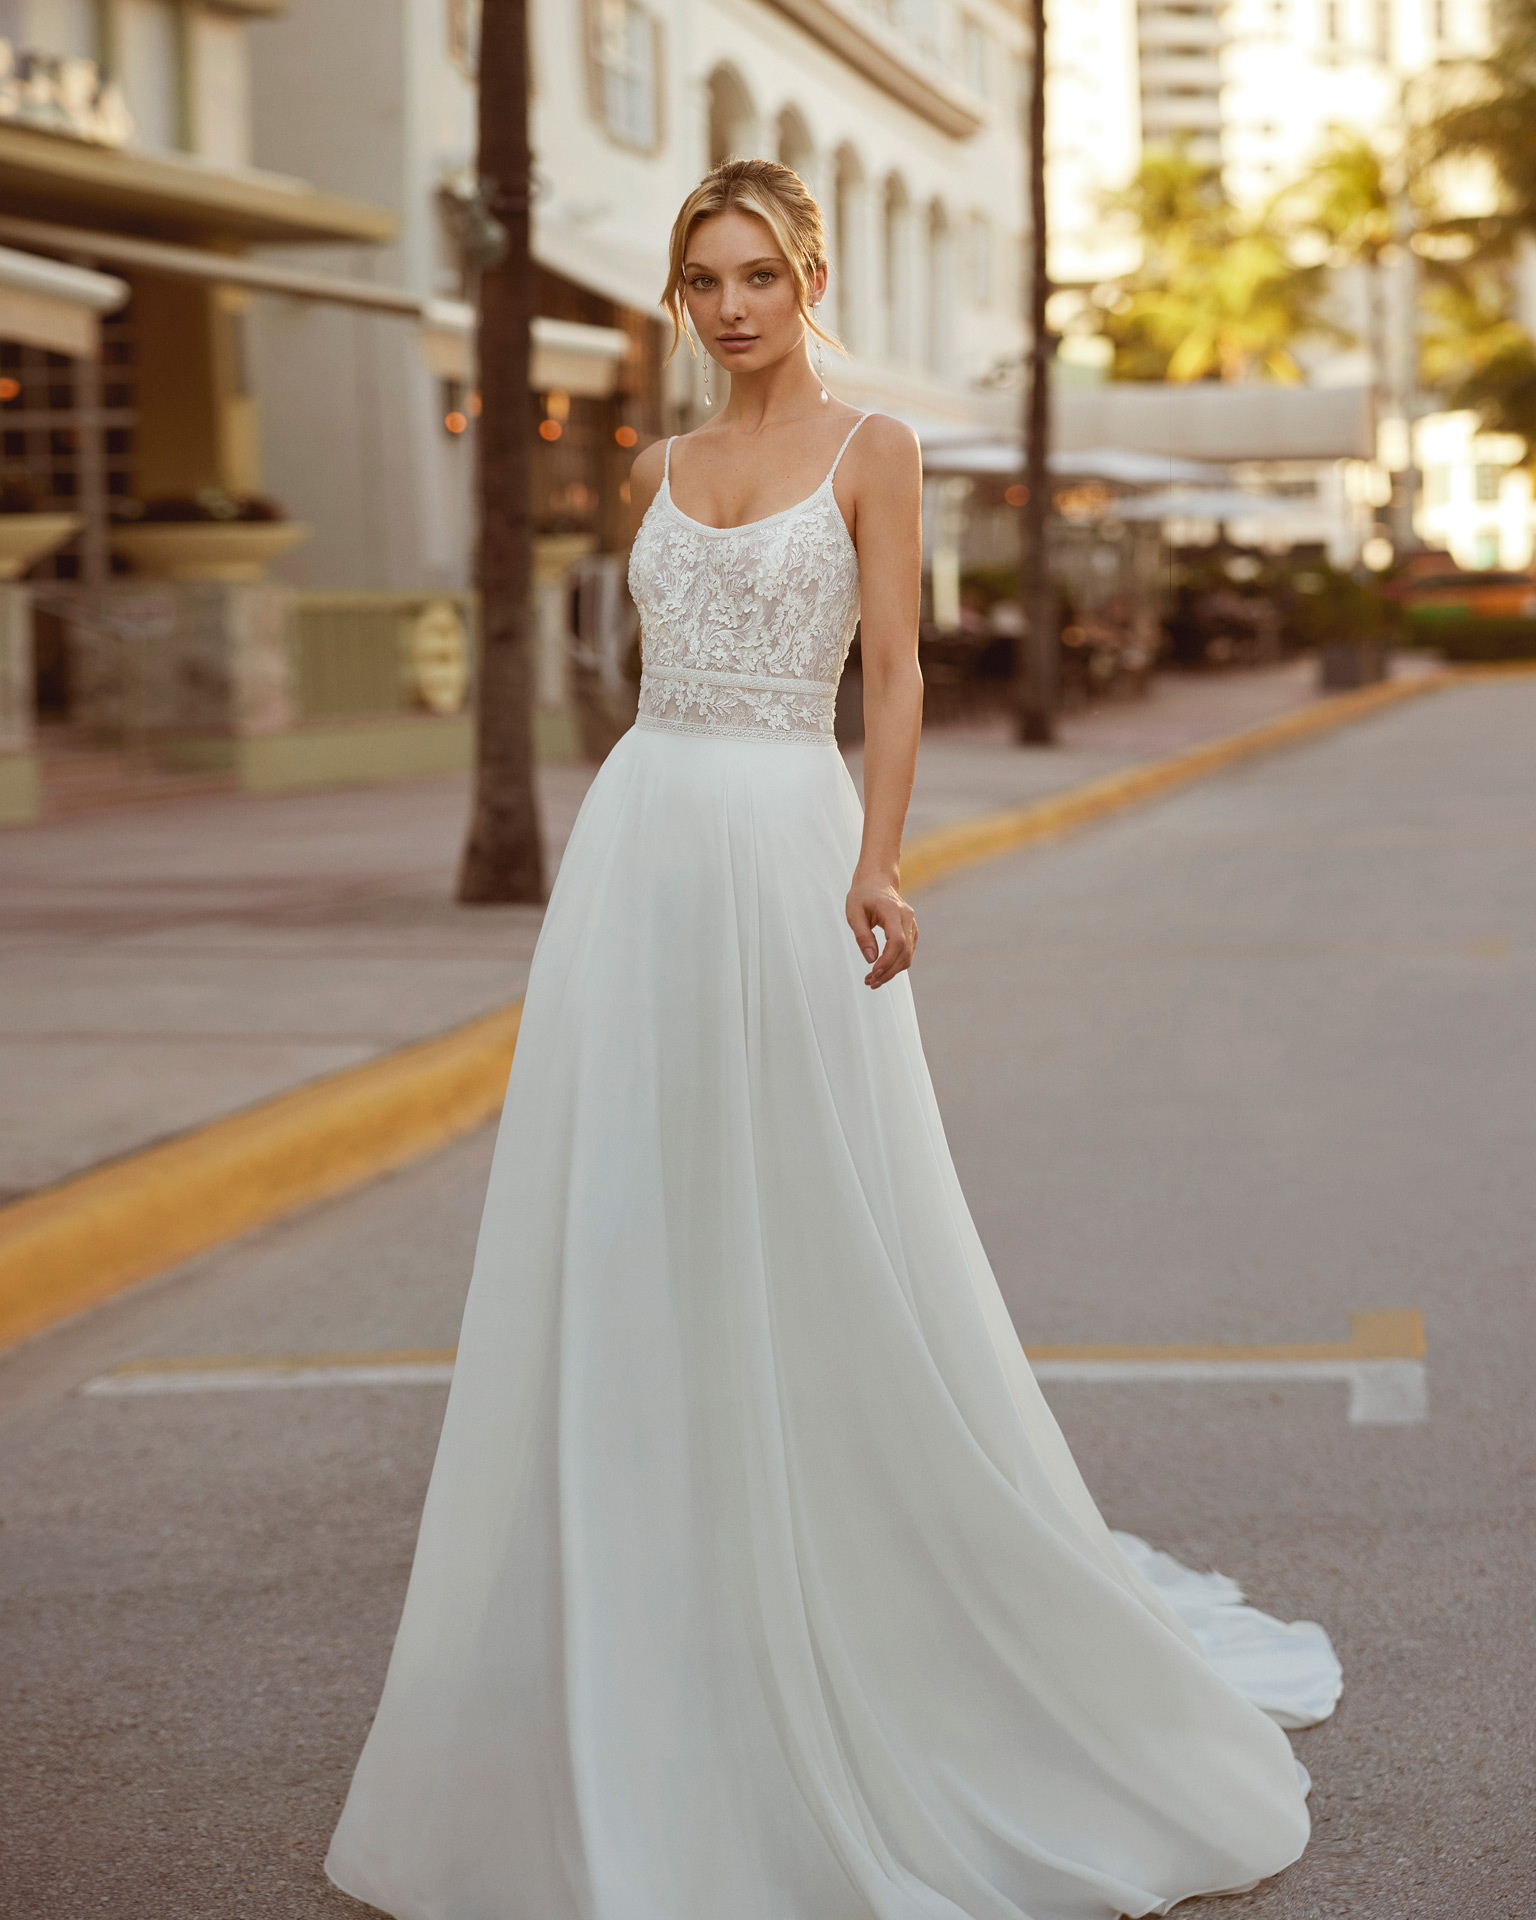 Princess-style A-line wedding dress, crafted in georgette. This Luna Novias dress is guaranteed to leave you captivated, with its round neckline and open back with straps. LUNA_NOVIAS.